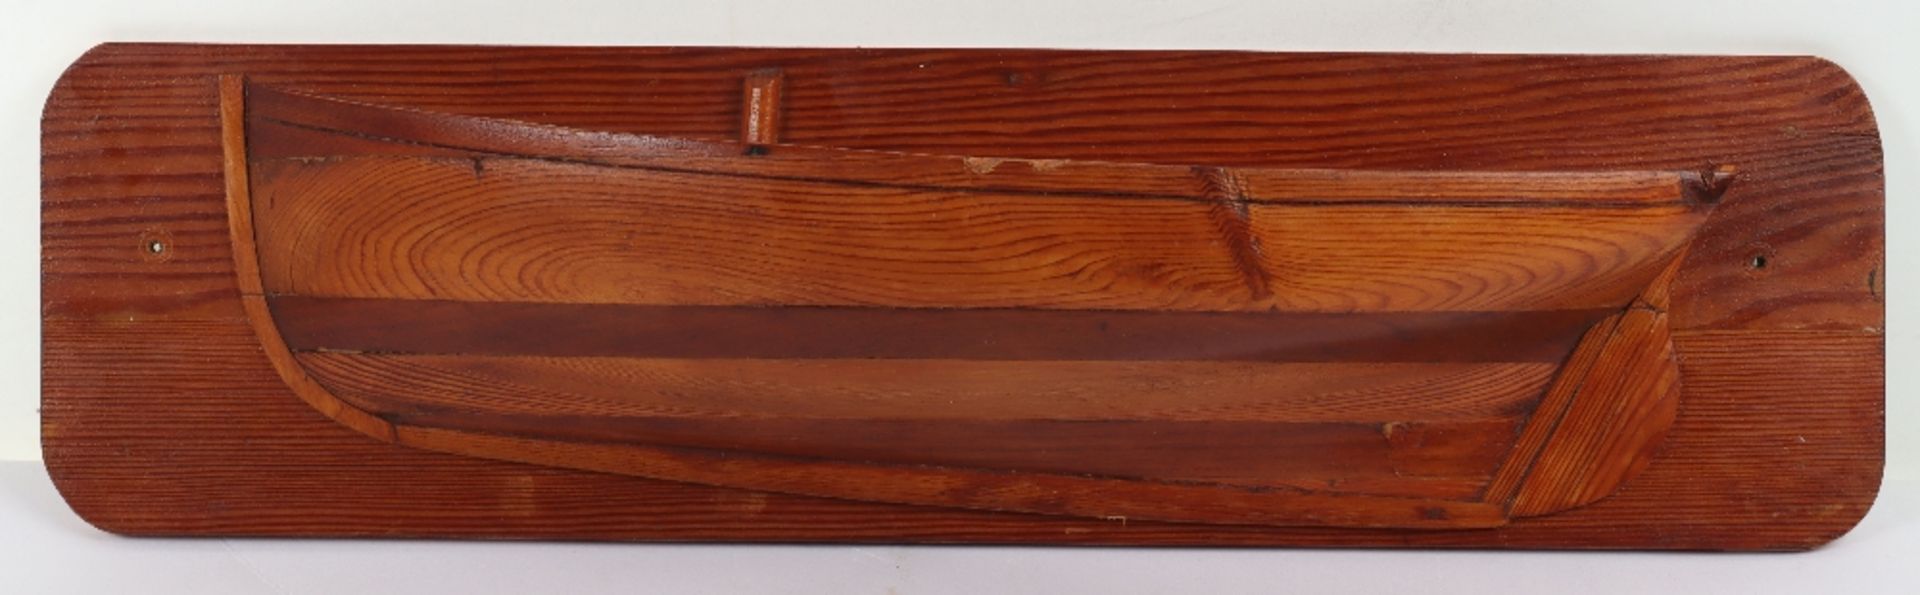 A 19th century pitch pine and beech wall mounted half block model of a boat, ‘Falmouth Oyster Dredge